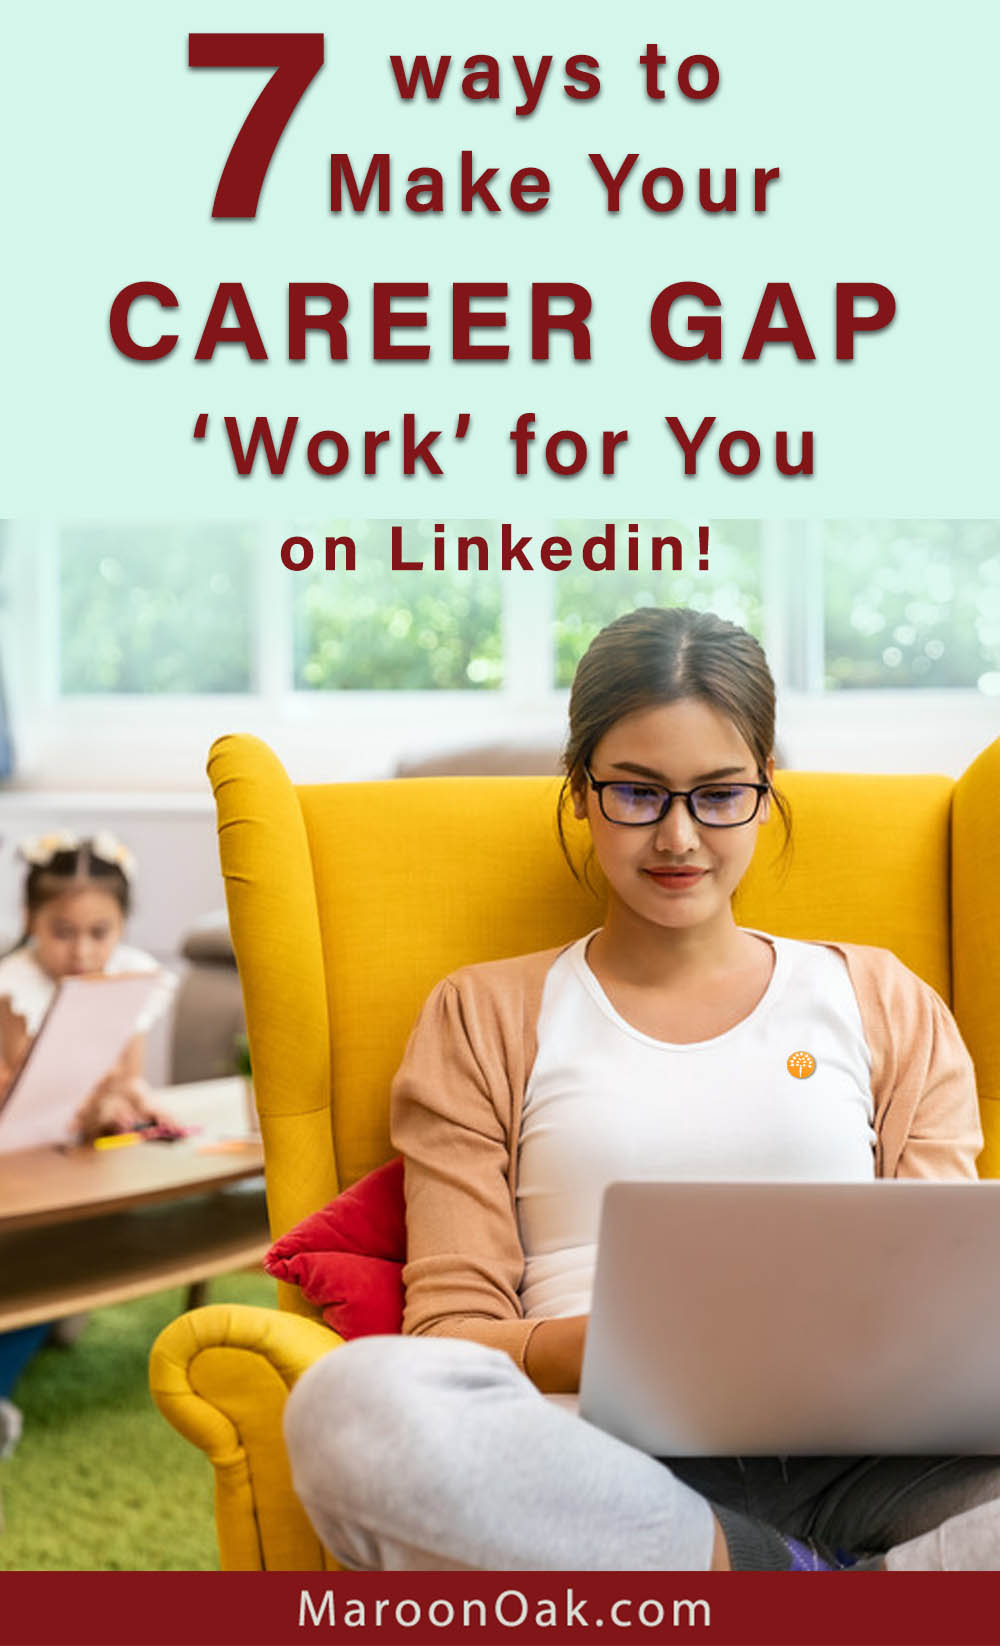 Even if you've taken time off from work, it's important to be professionally relevant. Learn the 7 ways to reframe your career gap on #LinkedIn. #MomswhoWork #Findwork #CareerGap